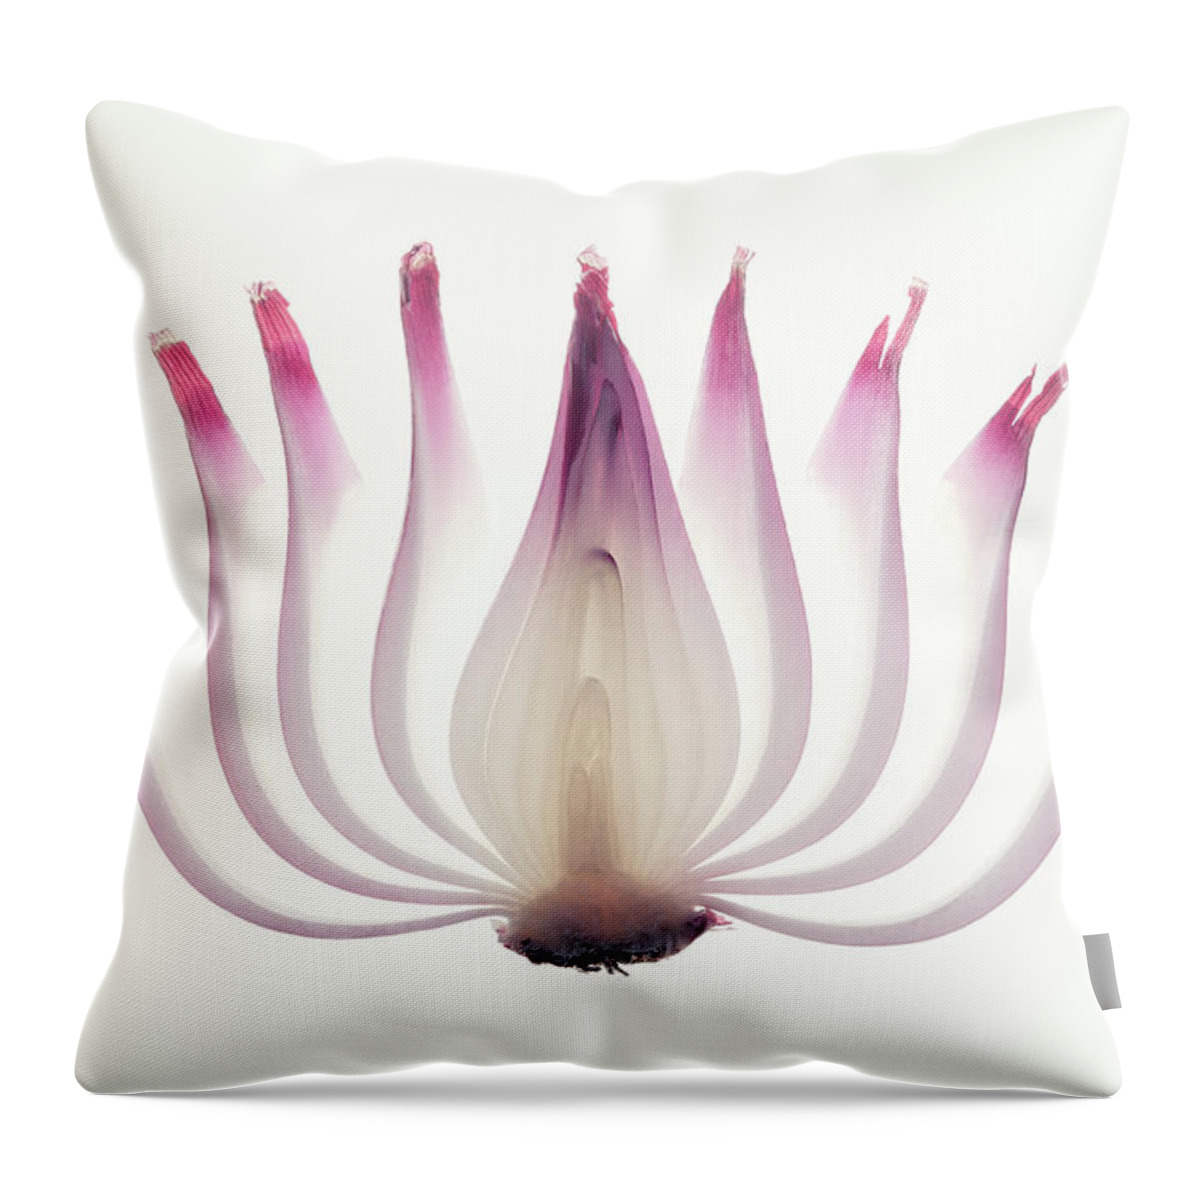 Red Throw Pillow featuring the photograph Red Onion Translucent peeled layers by Johan Swanepoel